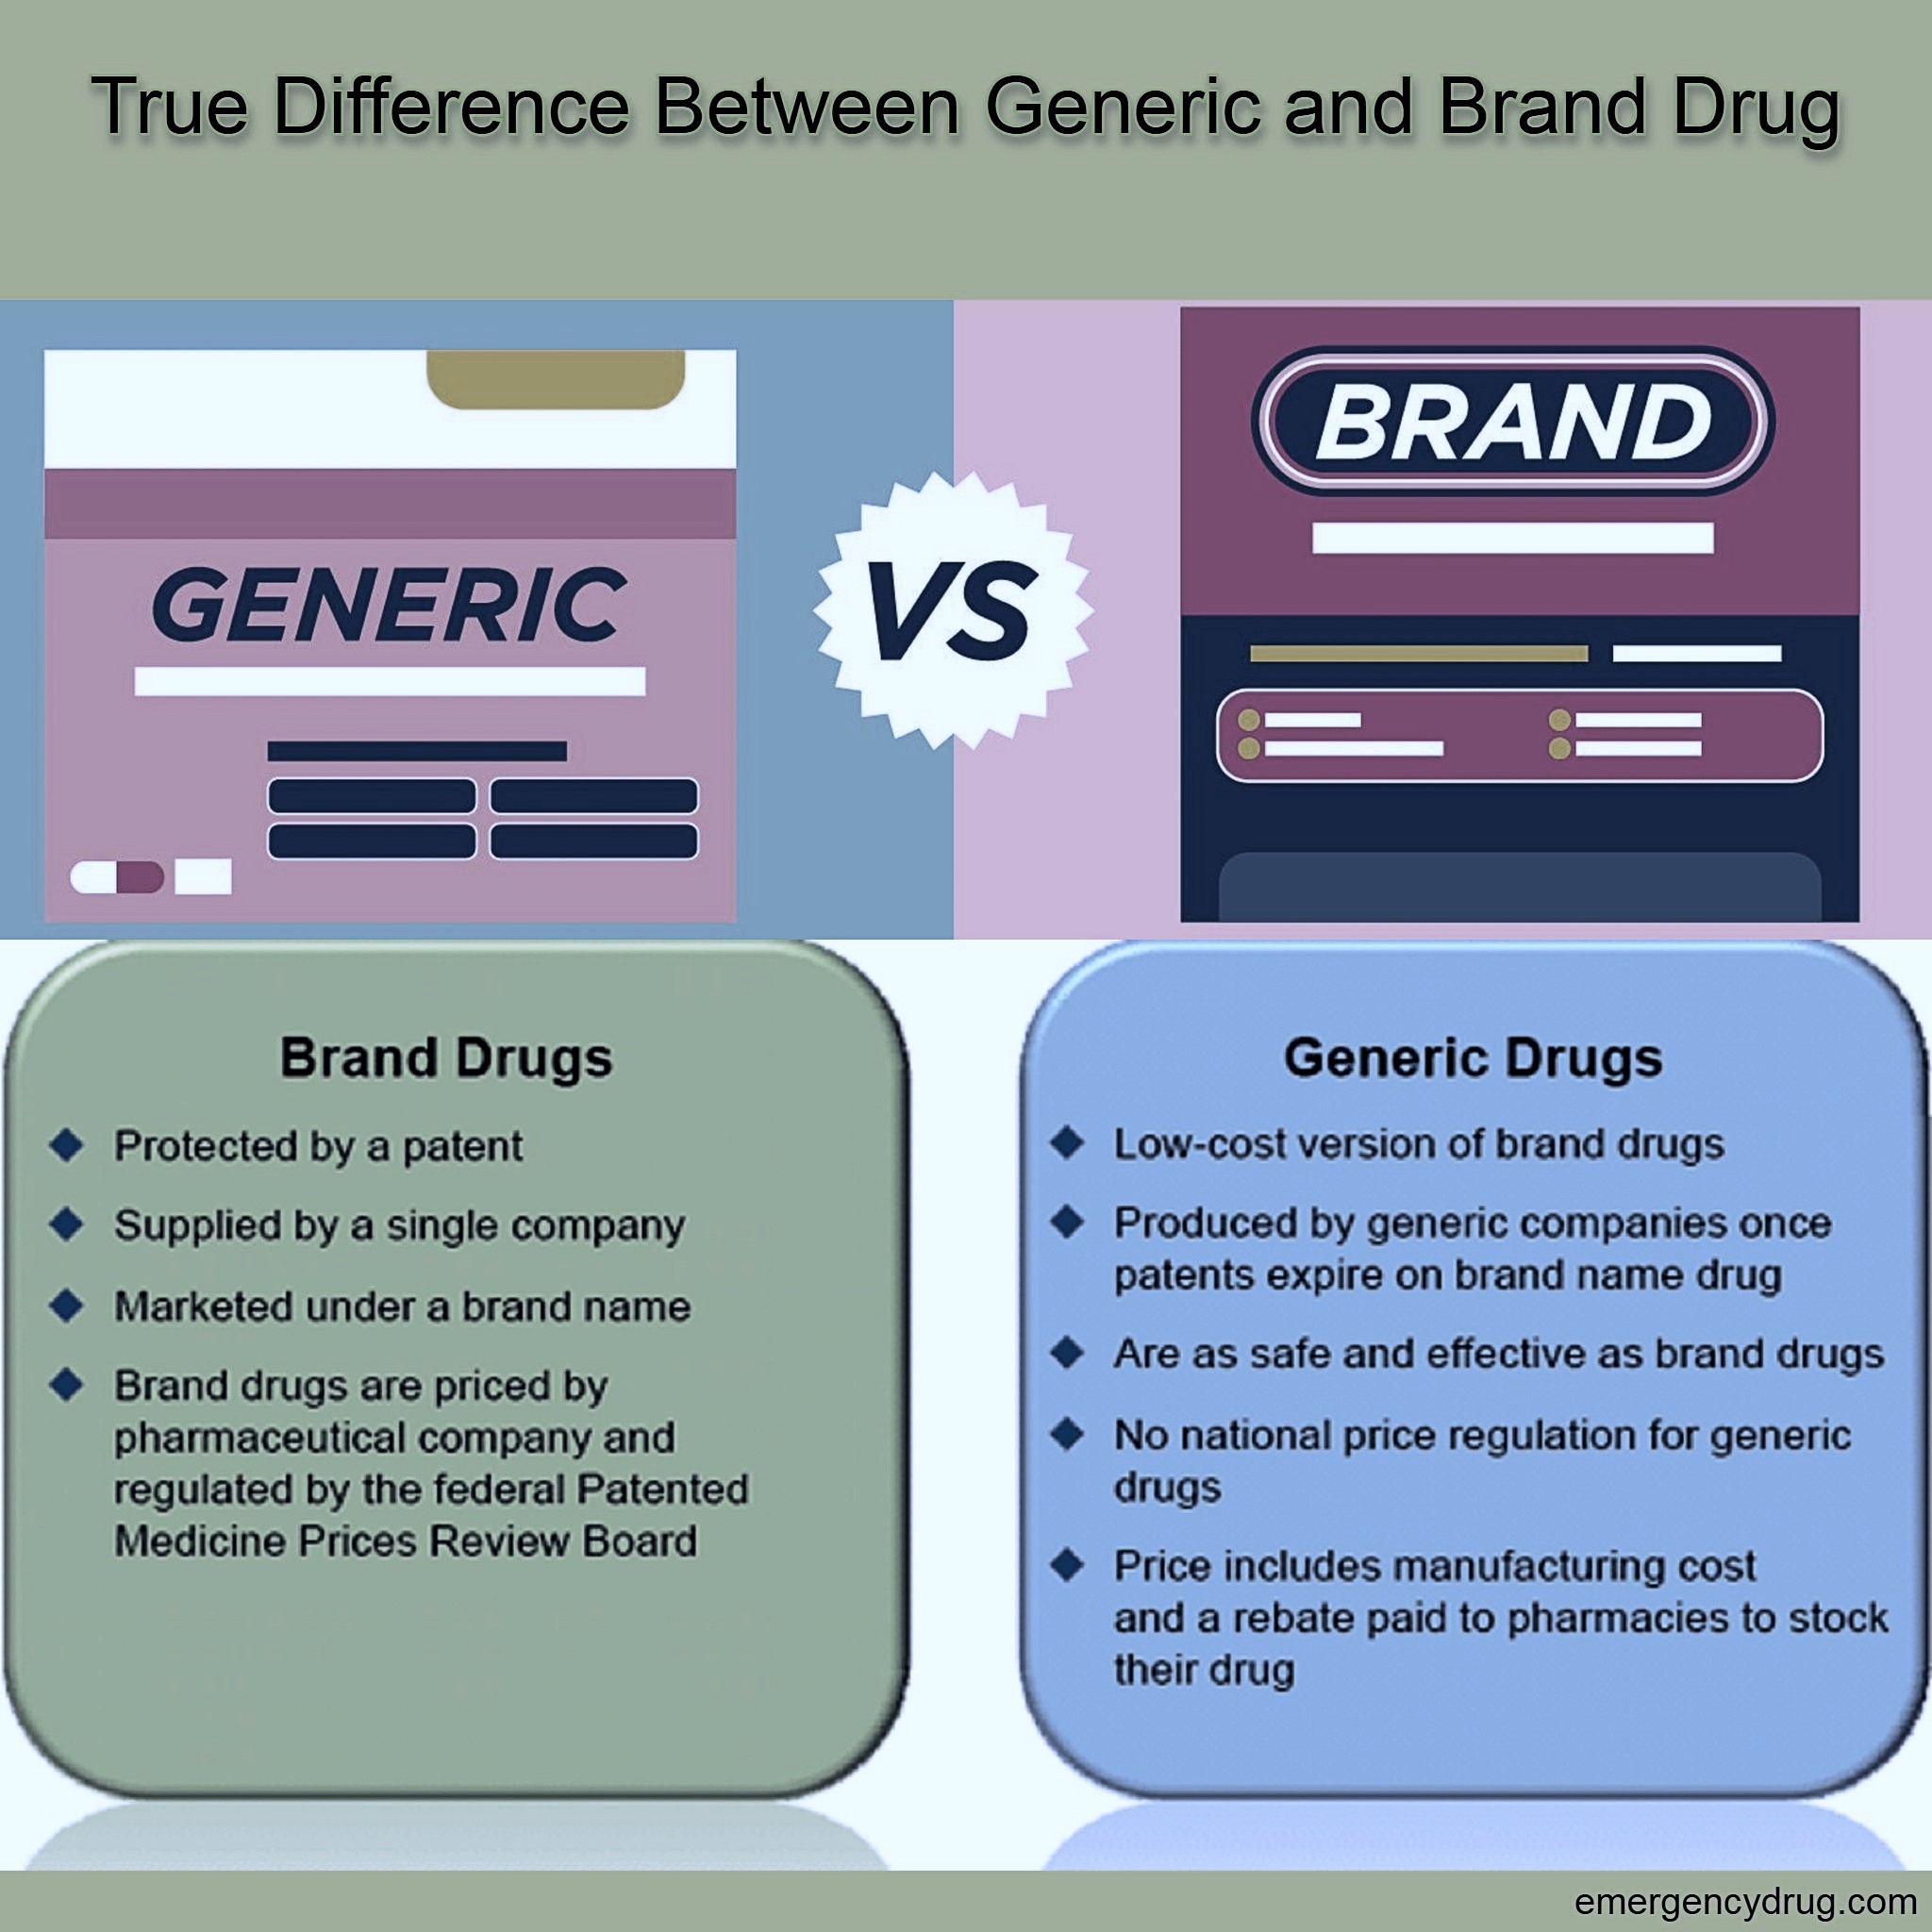 https://emergencydrug.com/wp-content/uploads/2021/07/True-Difference-Between-Generic-and-Brand-Drug-1.jpg